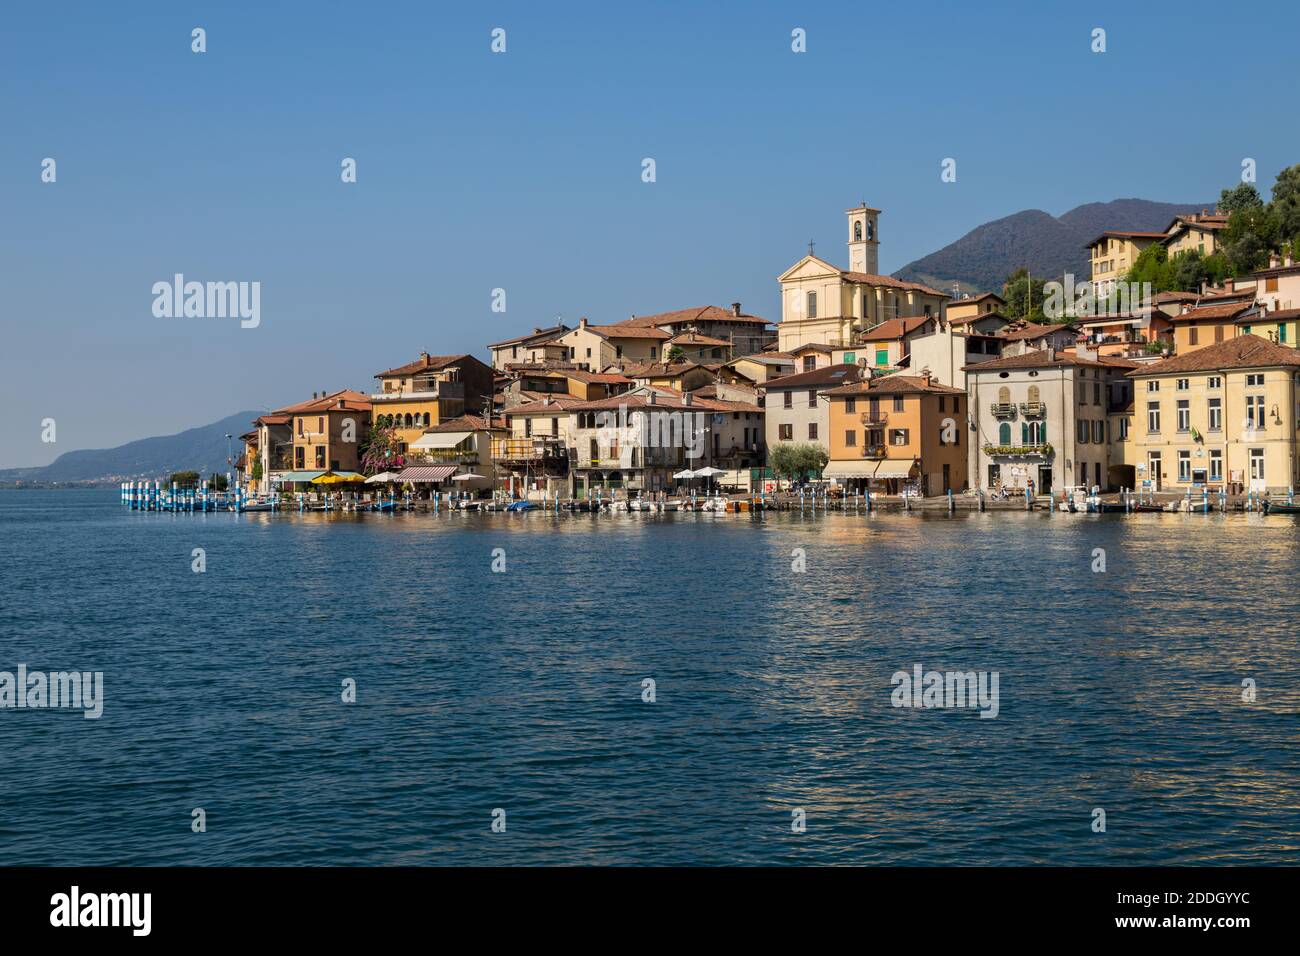 MONTE ISOLA, ITALY, SEPTEMBER 9, 2020 - View of Monte Isola, Iseo Lake, Brescia province, Lombardy, Italy. Stock Photo